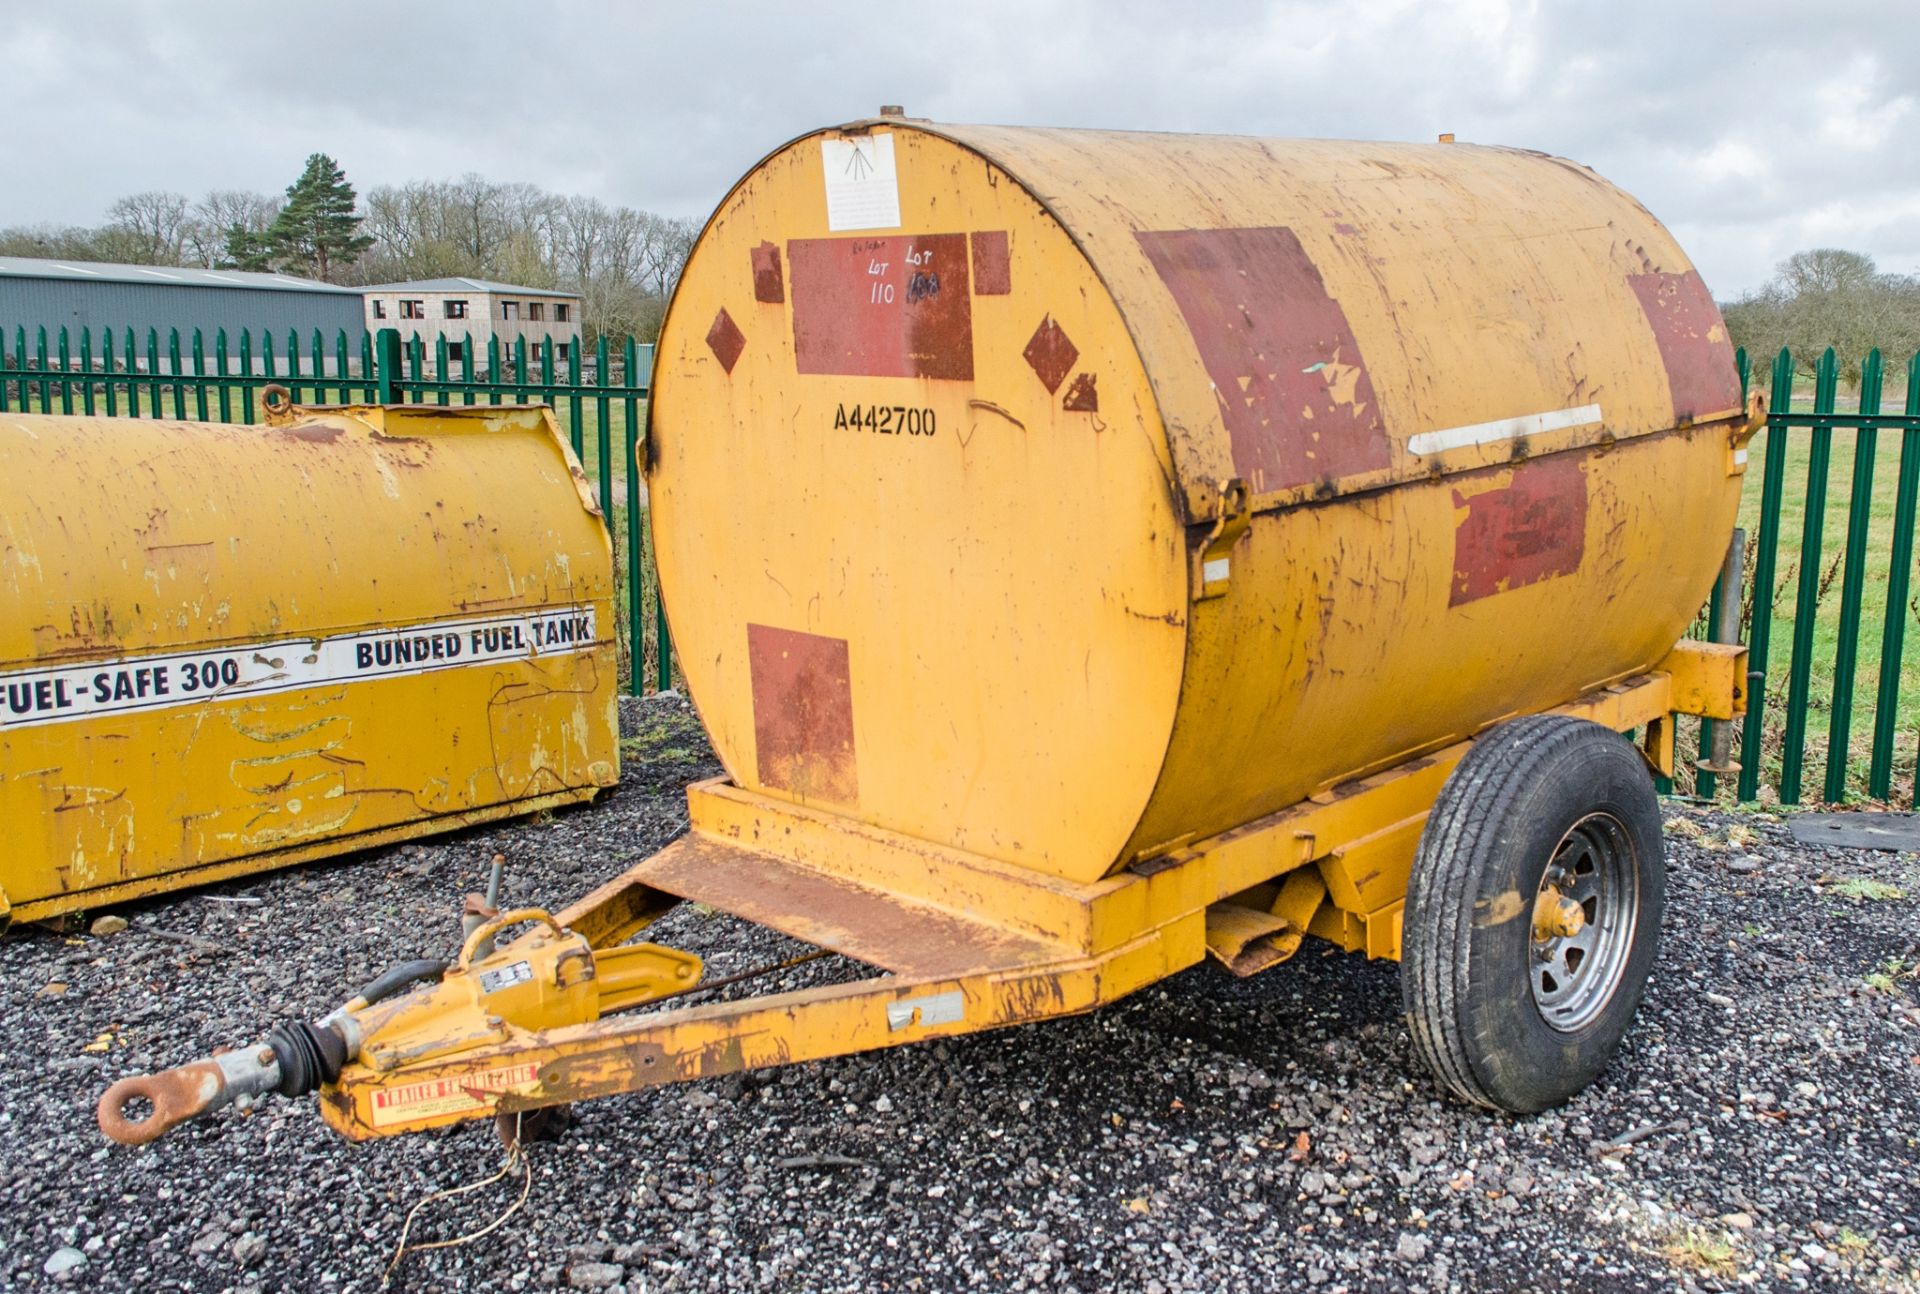 Trailer Engineering 2140 litre site tow bunded fuel bowser A442700 CO